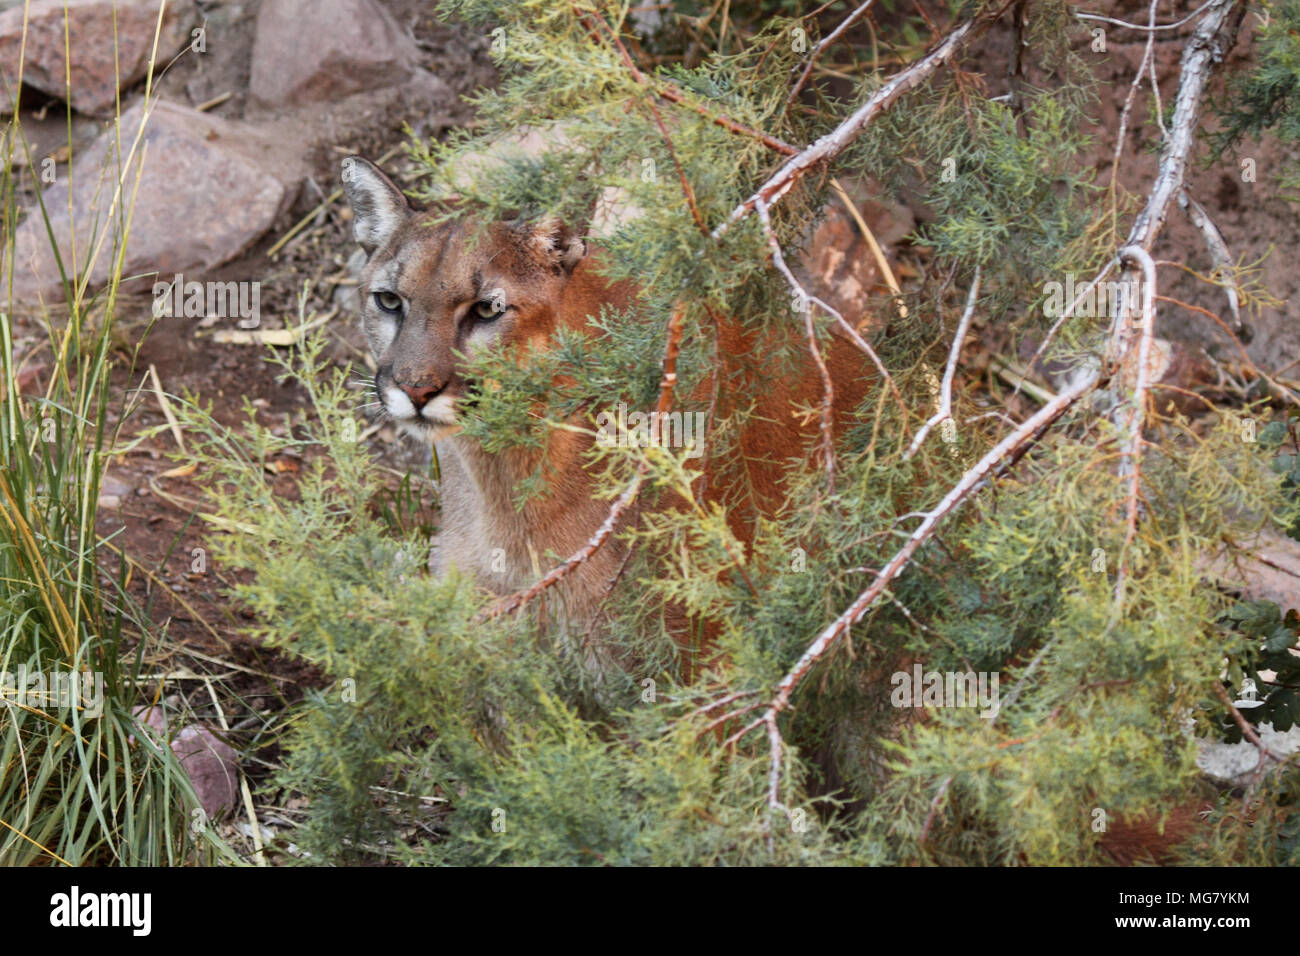 A typical view of a Cougar (also called Puma or Mountain Lion). Stock Photo